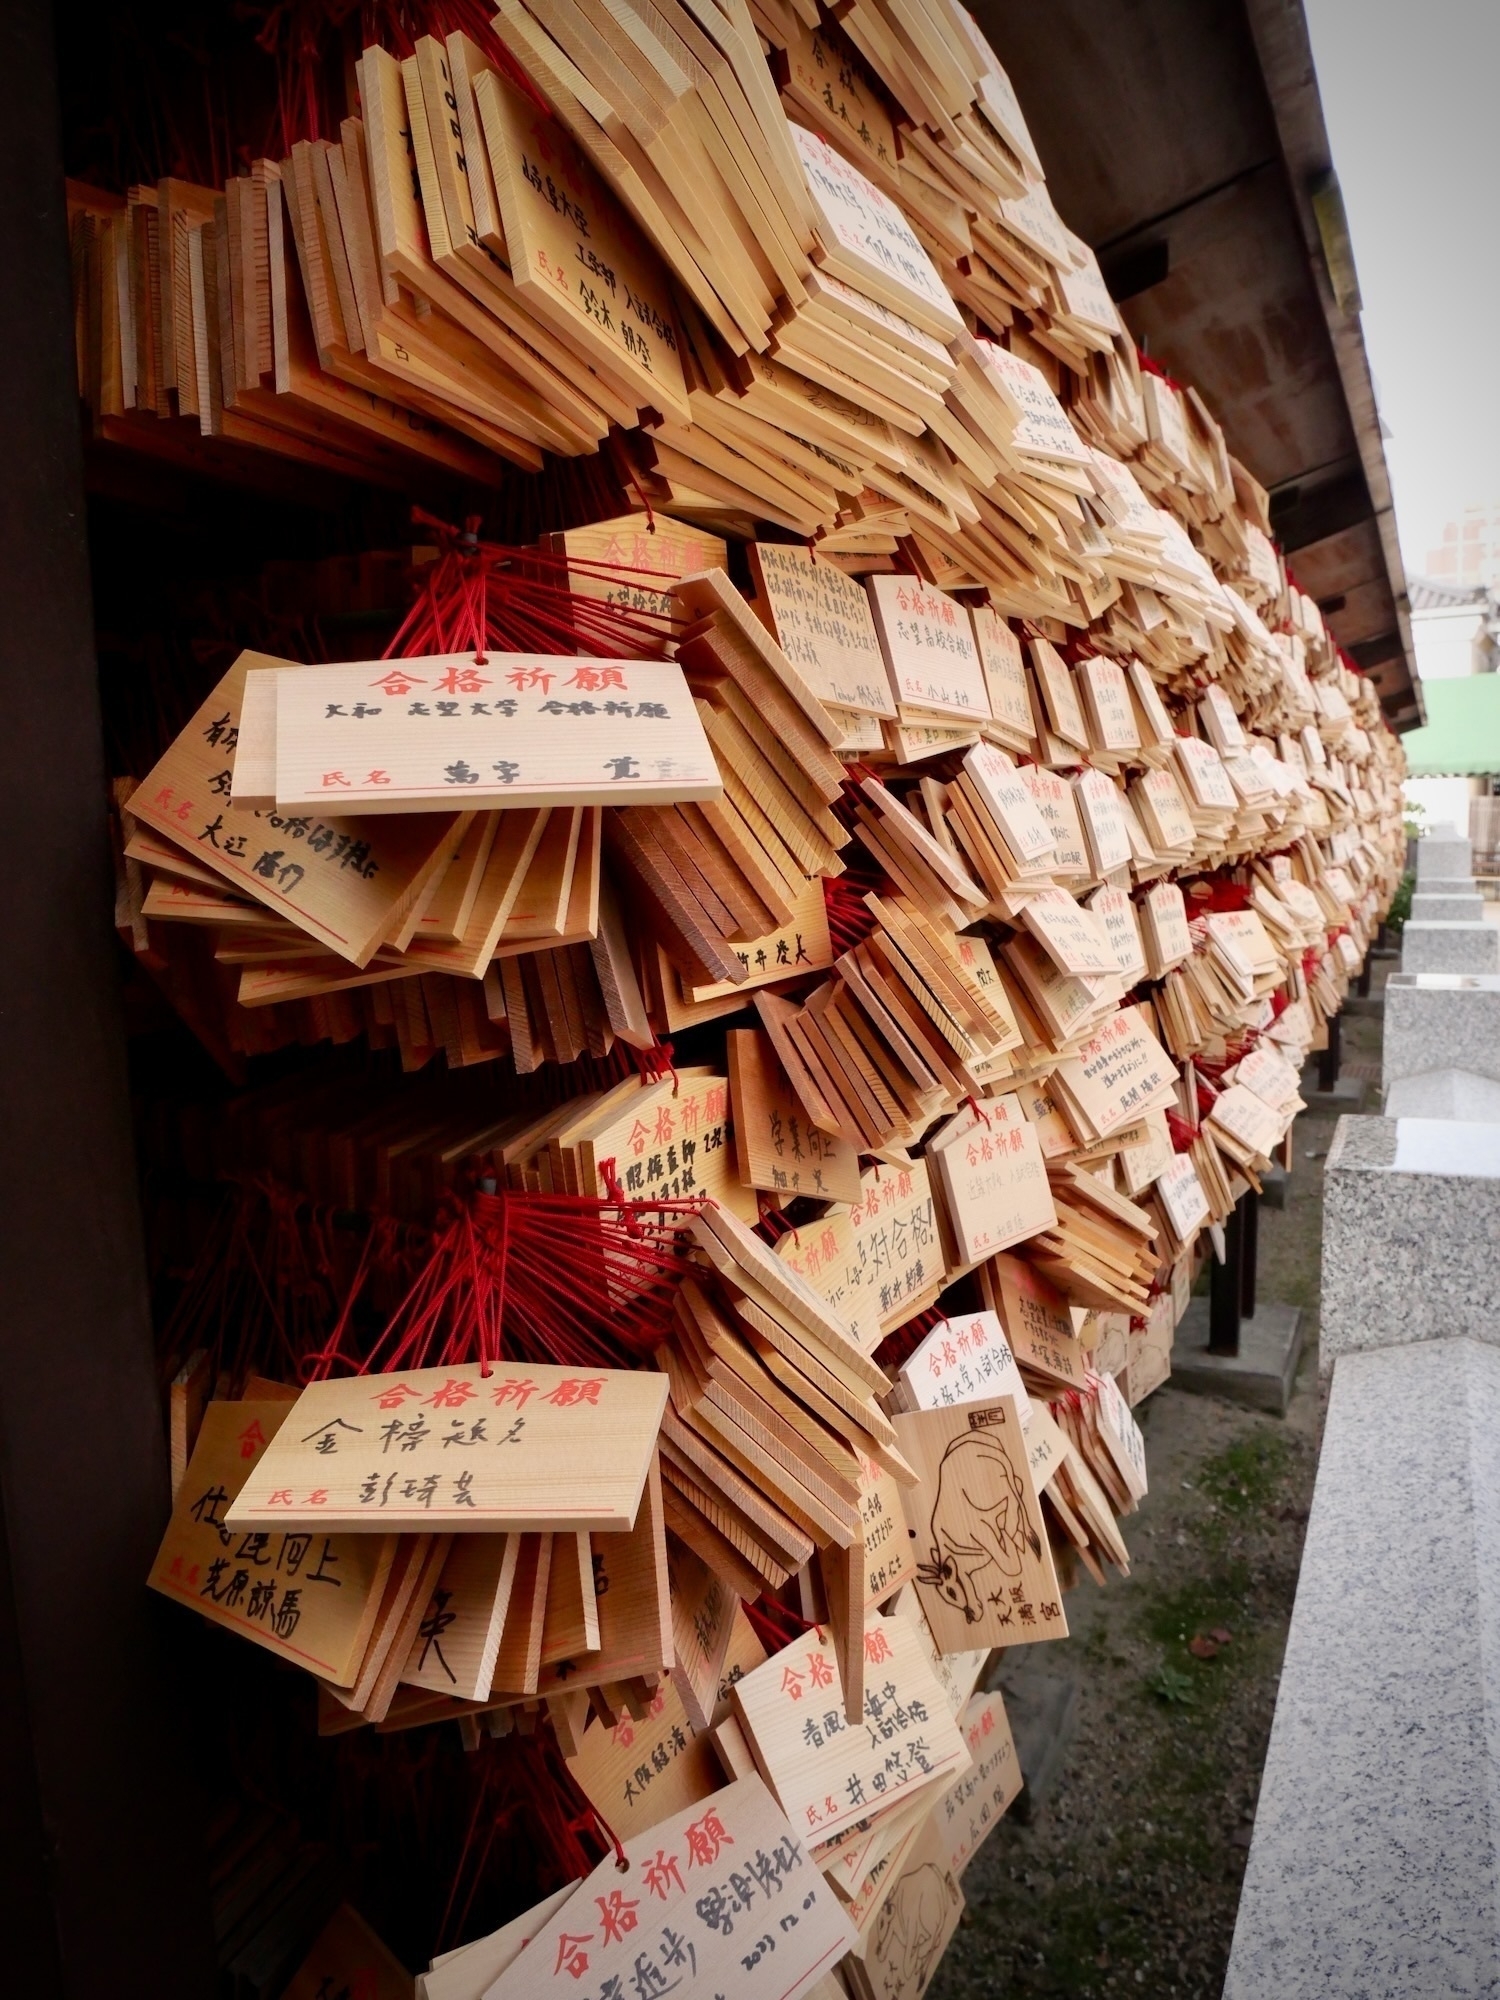 rows and rows of wooden prayer tablets. Shot taken from an oblique angle to show how many are stacked upon one another